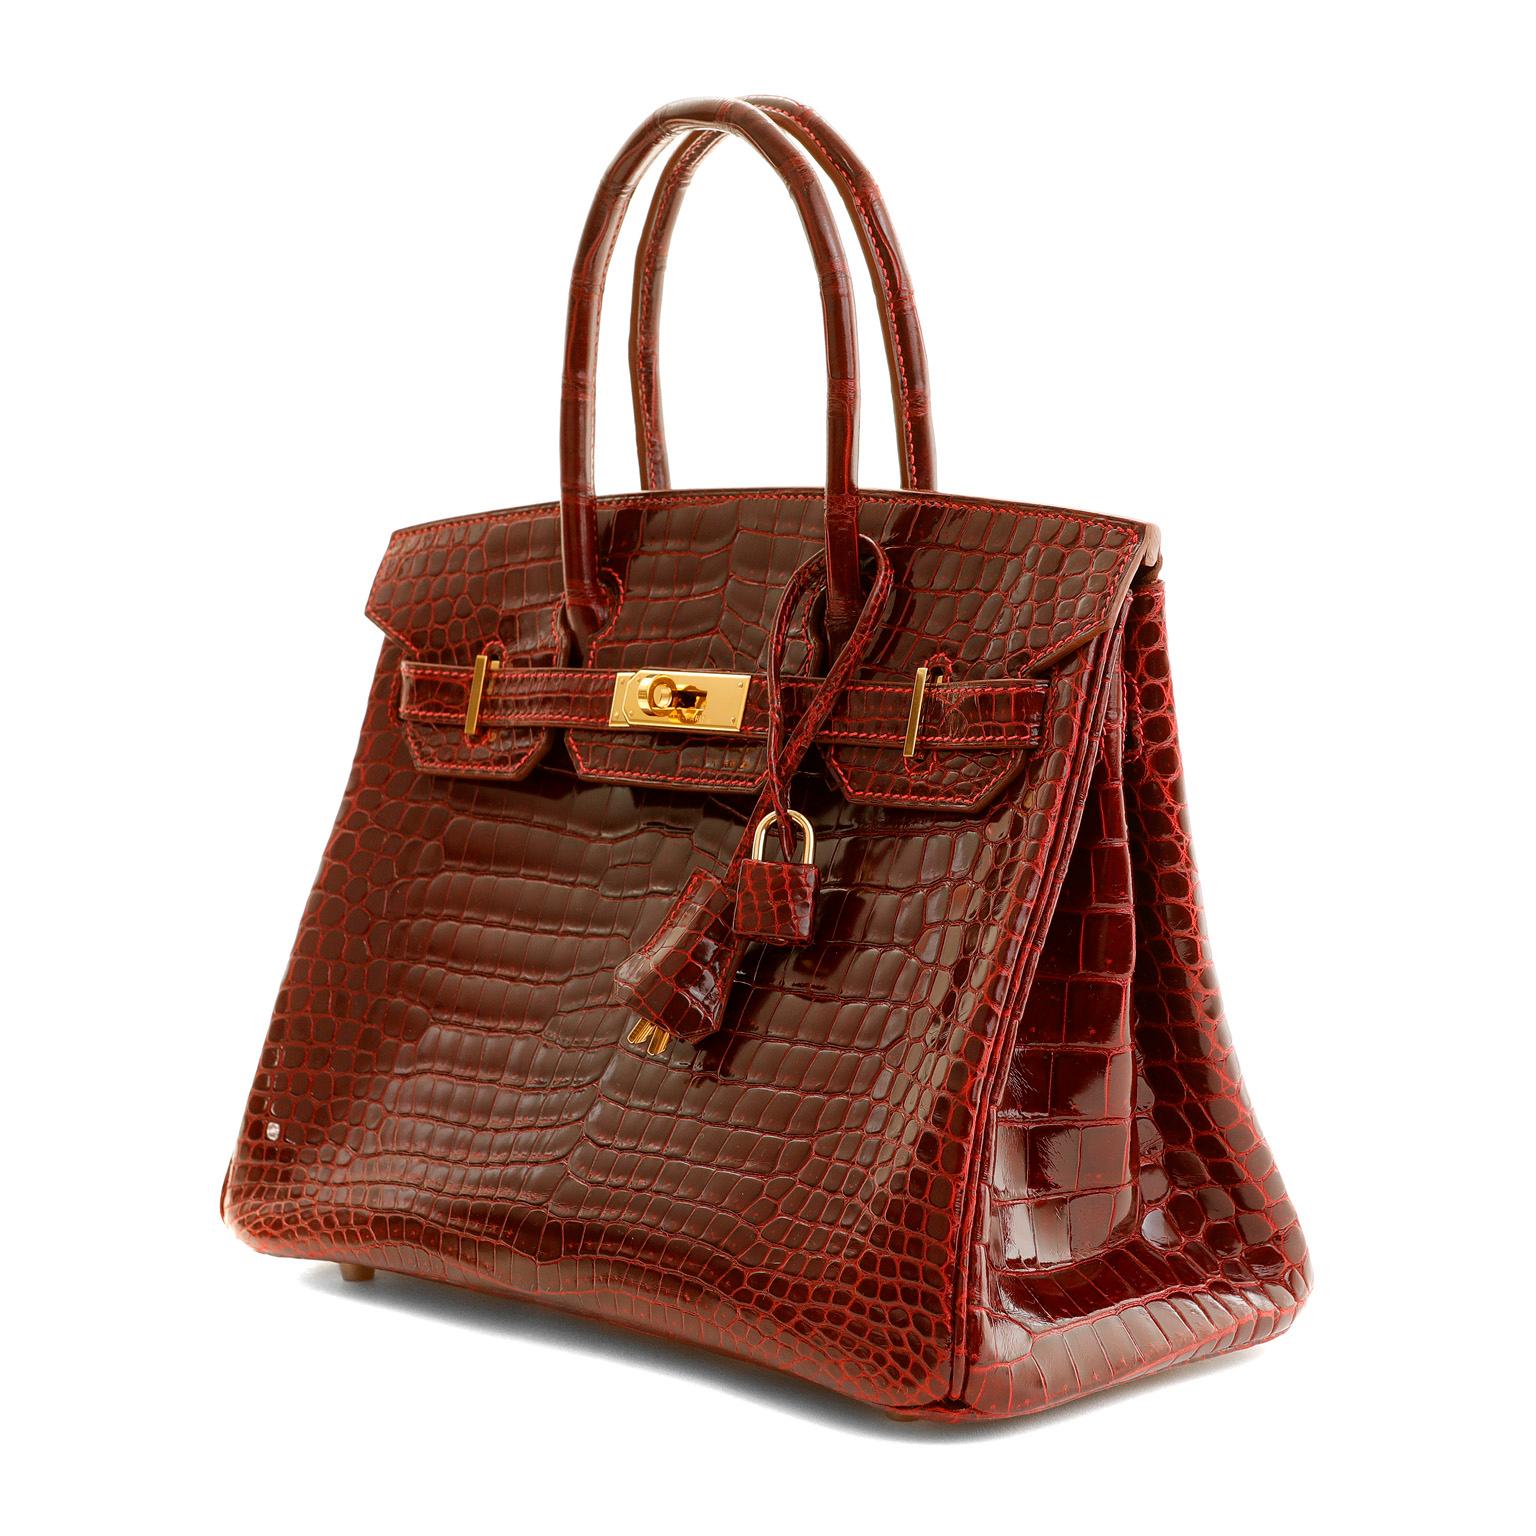 This authentic Hermès 30 cm Bordeaux Crocodile Birkin is in pristine condition and has been meticulously stored.   Hermès bags are considered the ultimate luxury item the world over.  Hand stitched by skilled craftsmen, wait lists of a year or more